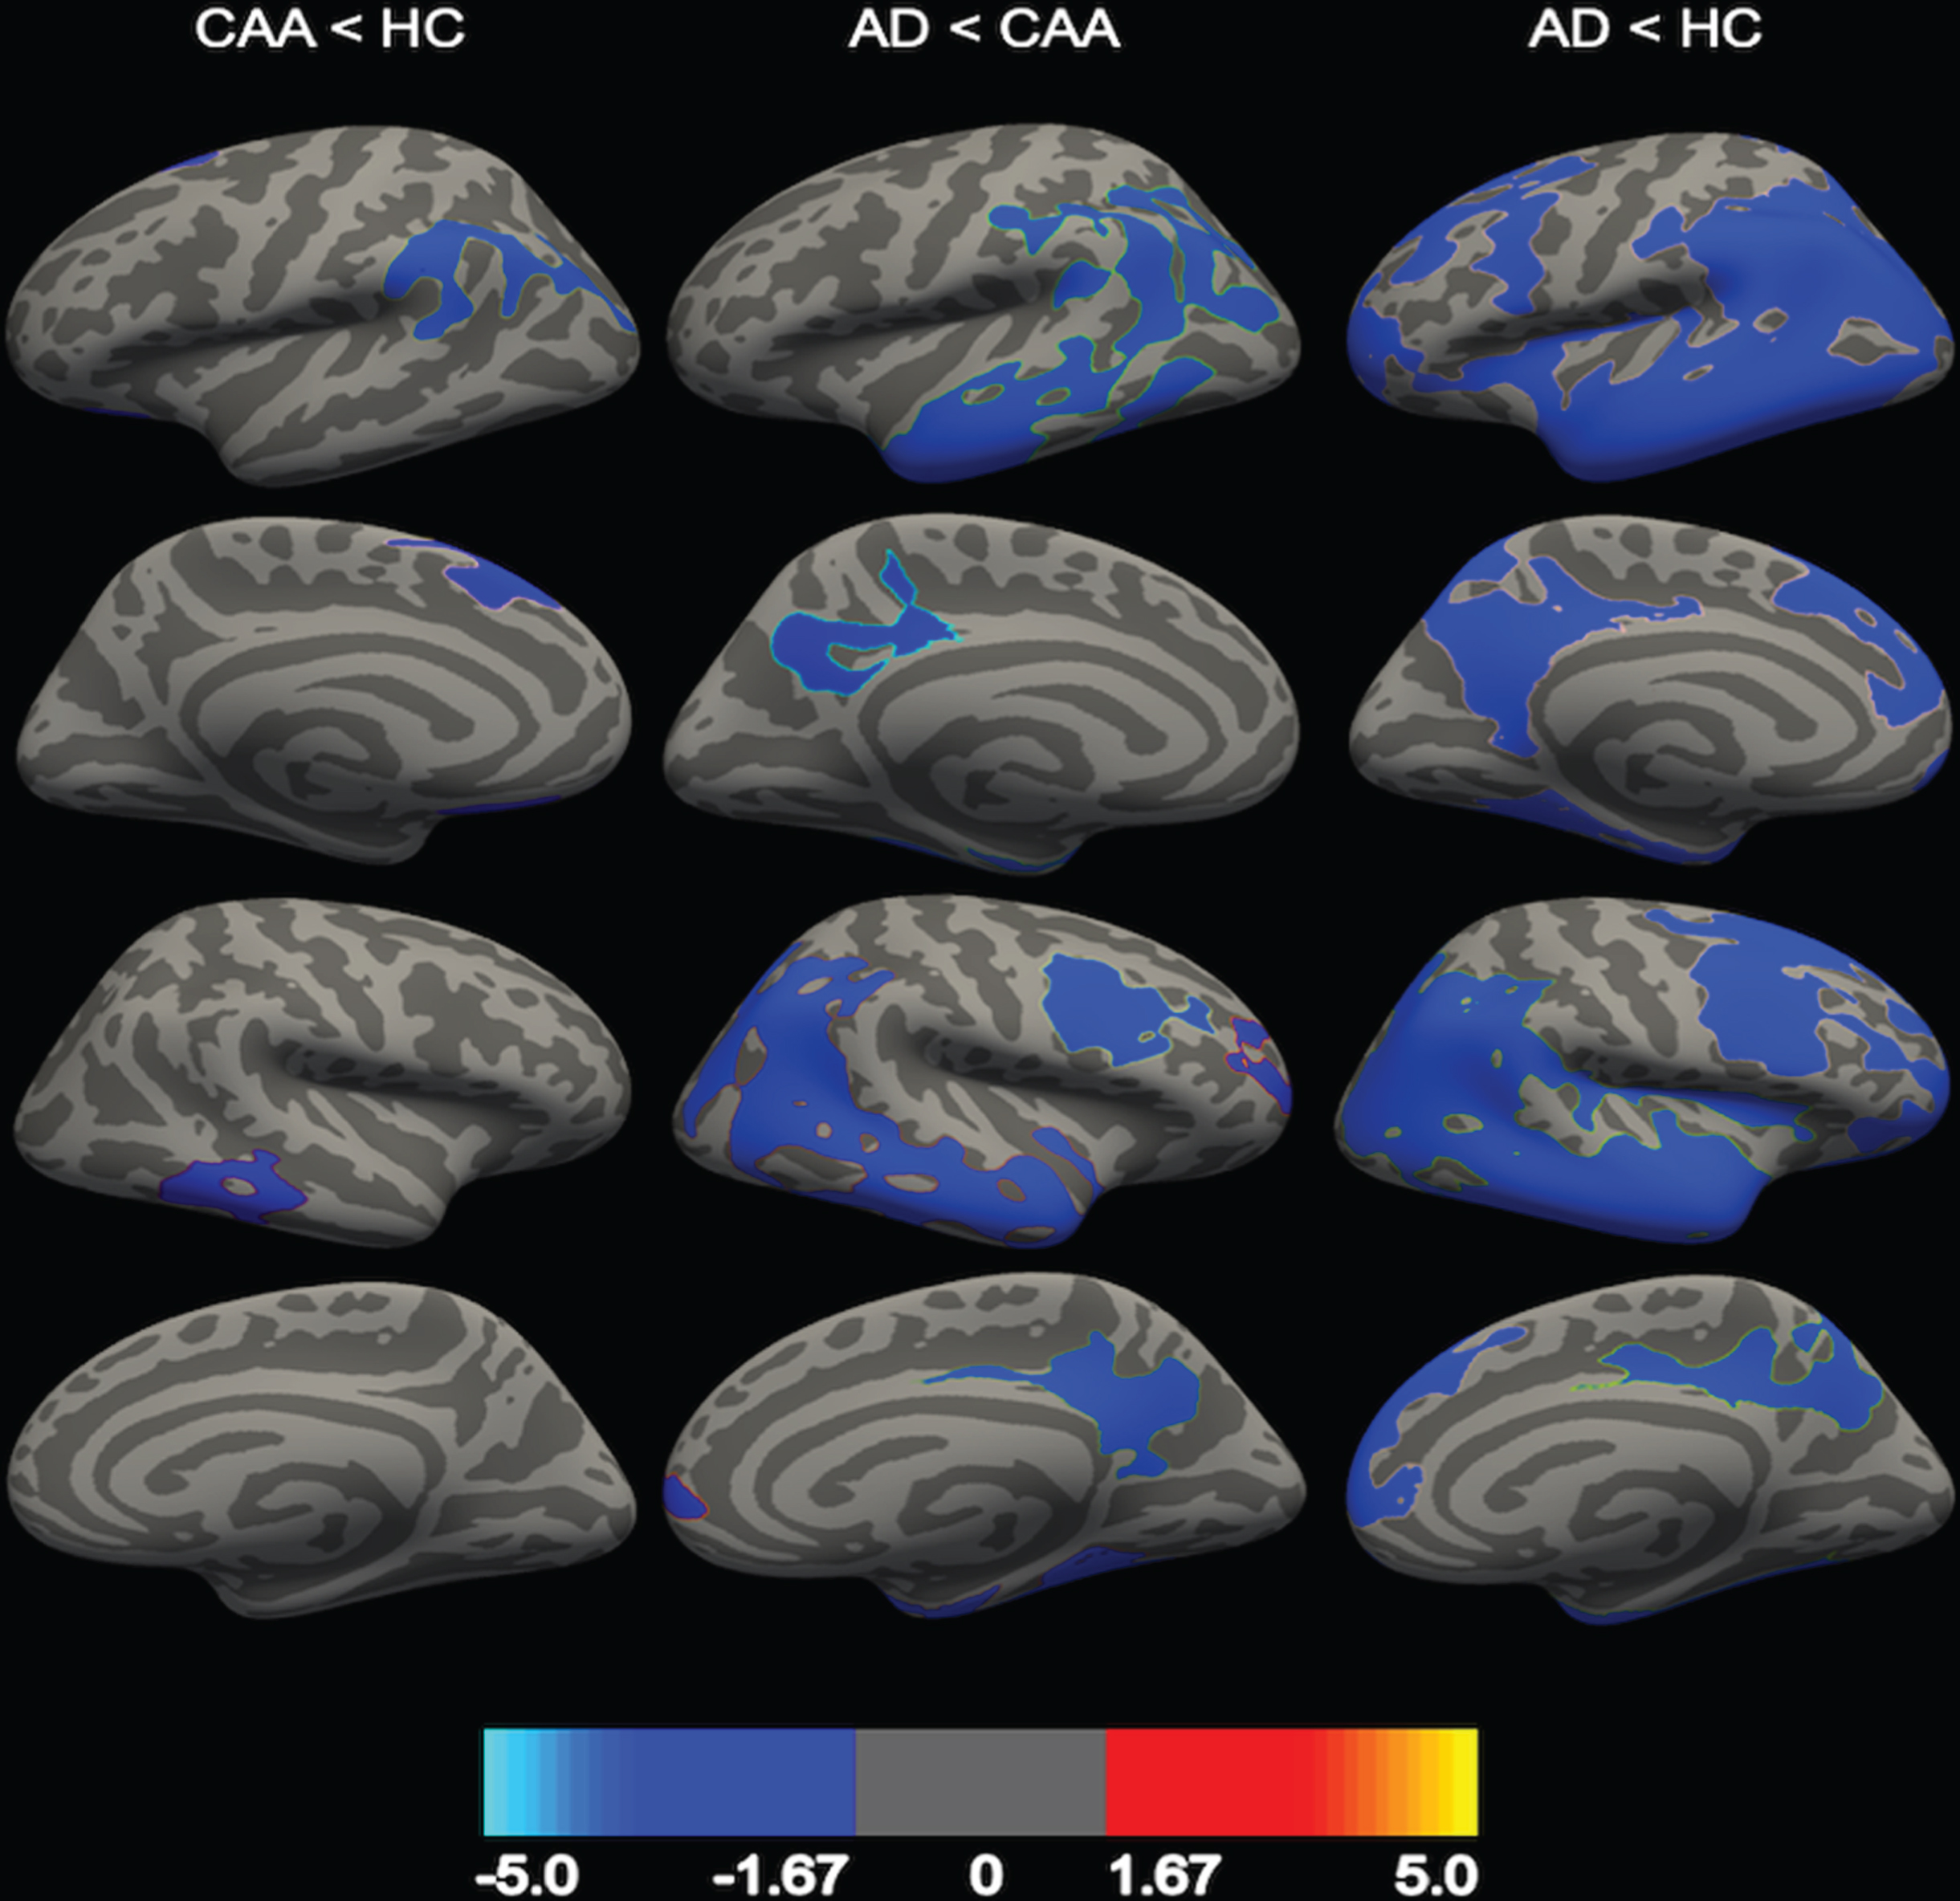 Comparison in regional cortical thickness between AD, CAA, and healthy controls (HC). CAA participants had thinner cortex compared to HC (first column), and AD participants had thinner cortex compared to CAA (second column) and HC (third column). First row = left lateral view, second row = left medial view, third row = right lateral view, fourth row = right medial view. Clusters are represented at a corrected value of p < 0.05, with the color bar showing the logarithmic scale of p-values (-log10).